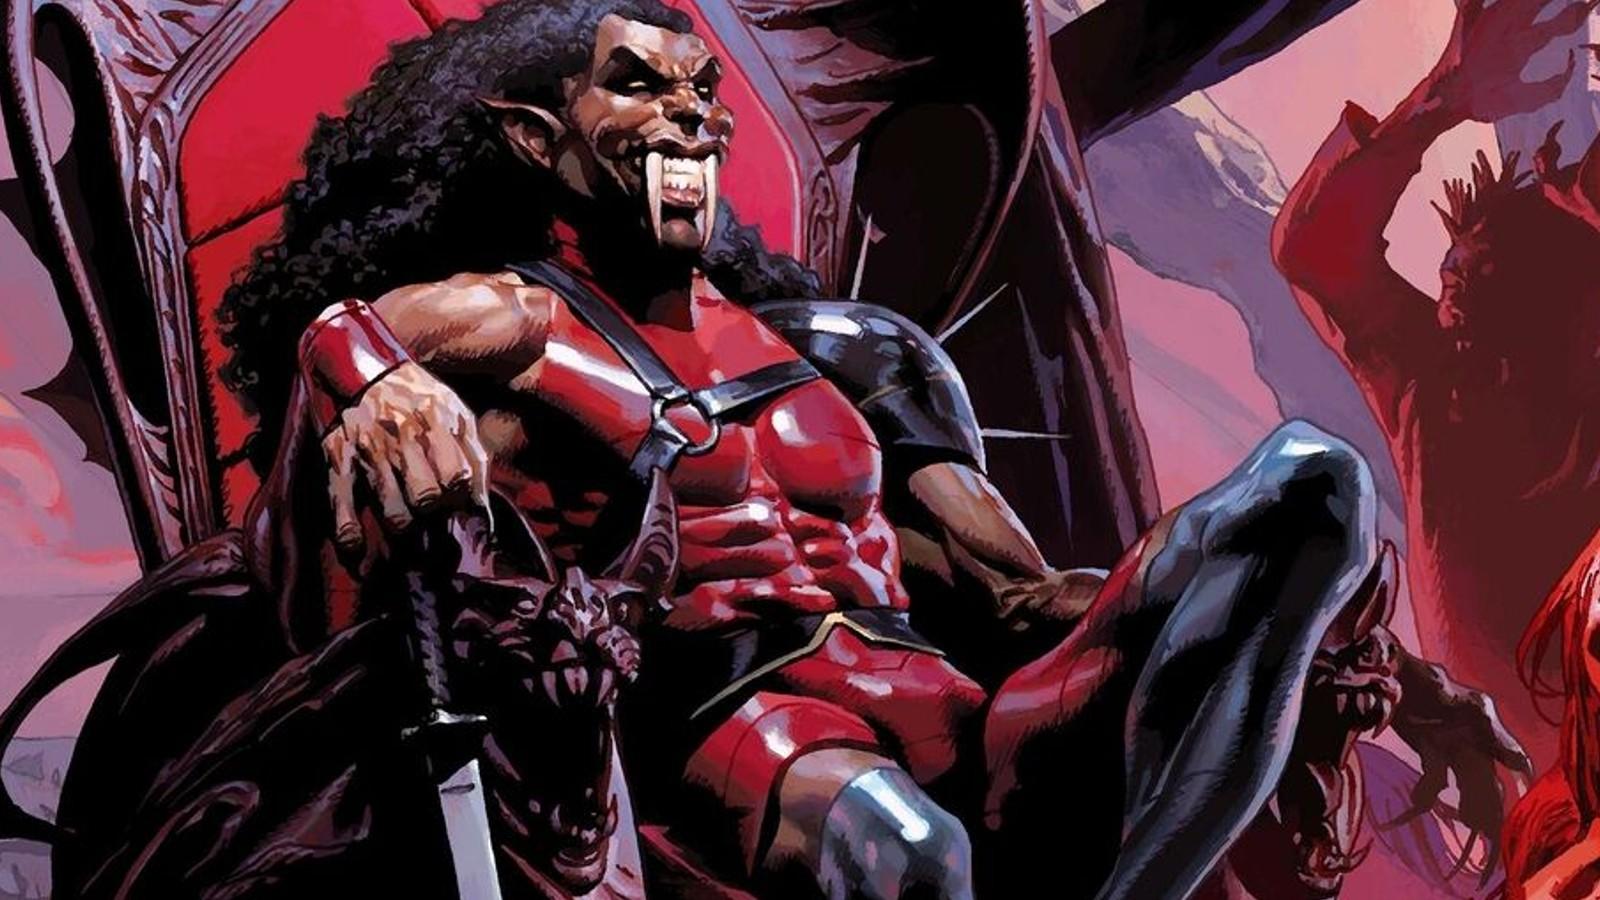 Blade sitting on a throne in the comics.